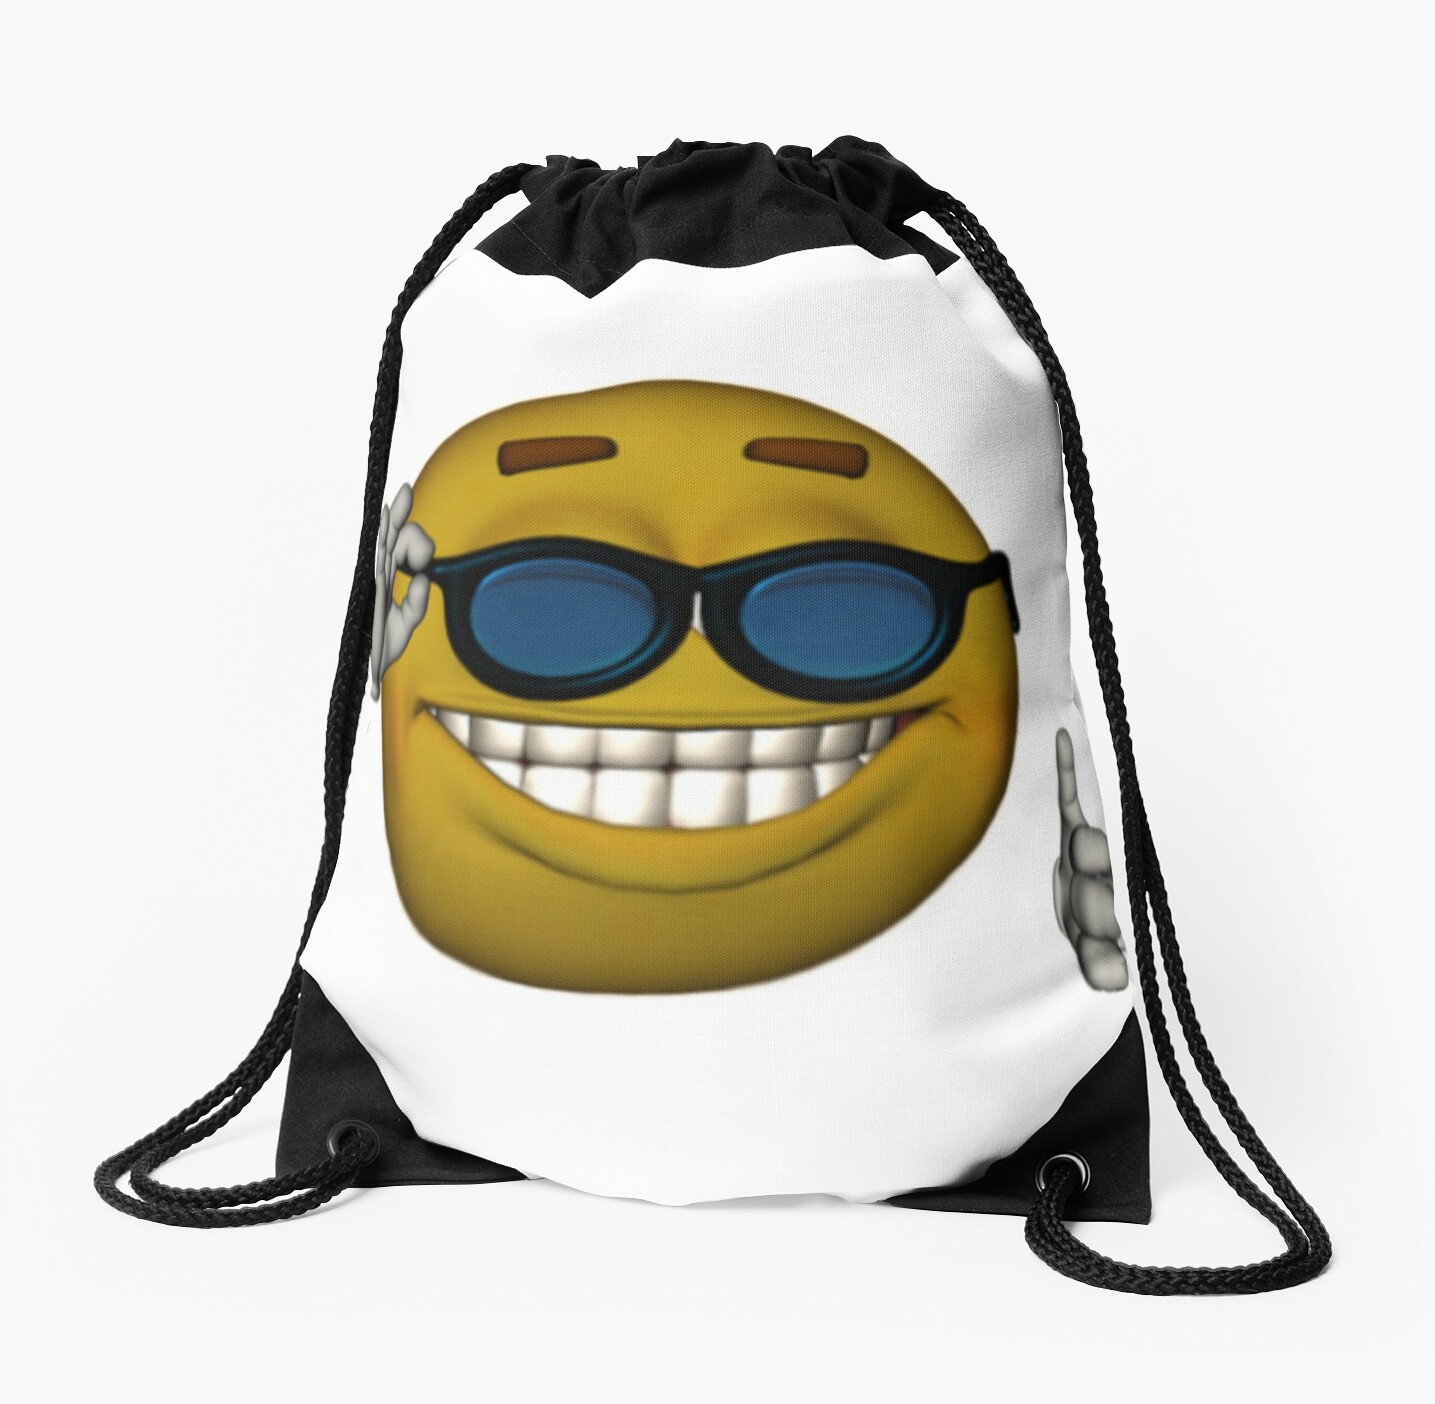 Smiley Face Sunglasses Thumbs Up Emoji Meme Face Drawstring Bags By